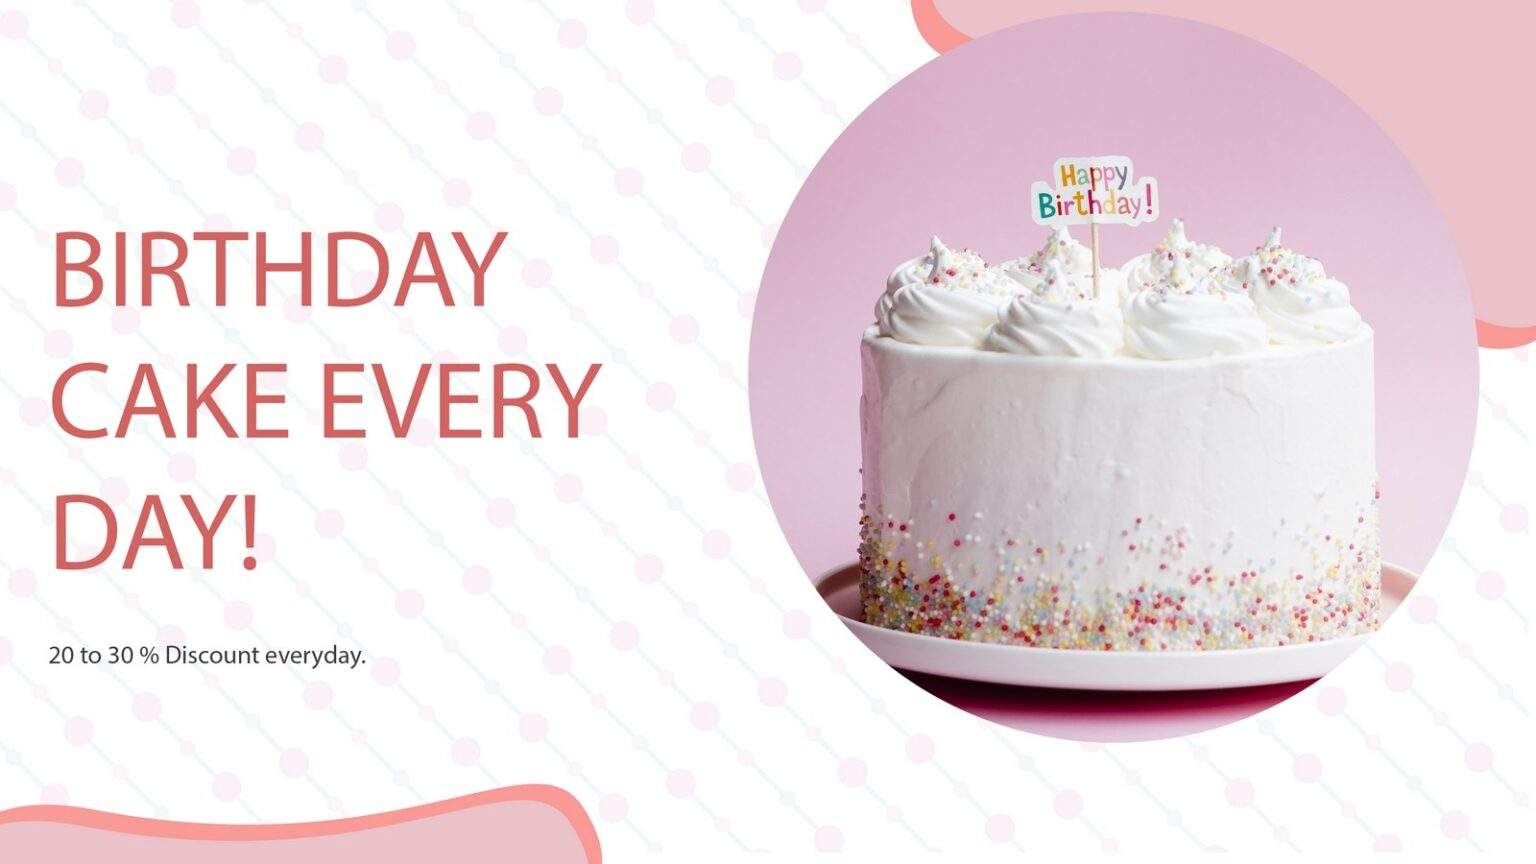 Online Cake Delivery in Vadodara Free Delivery in 2 Hours